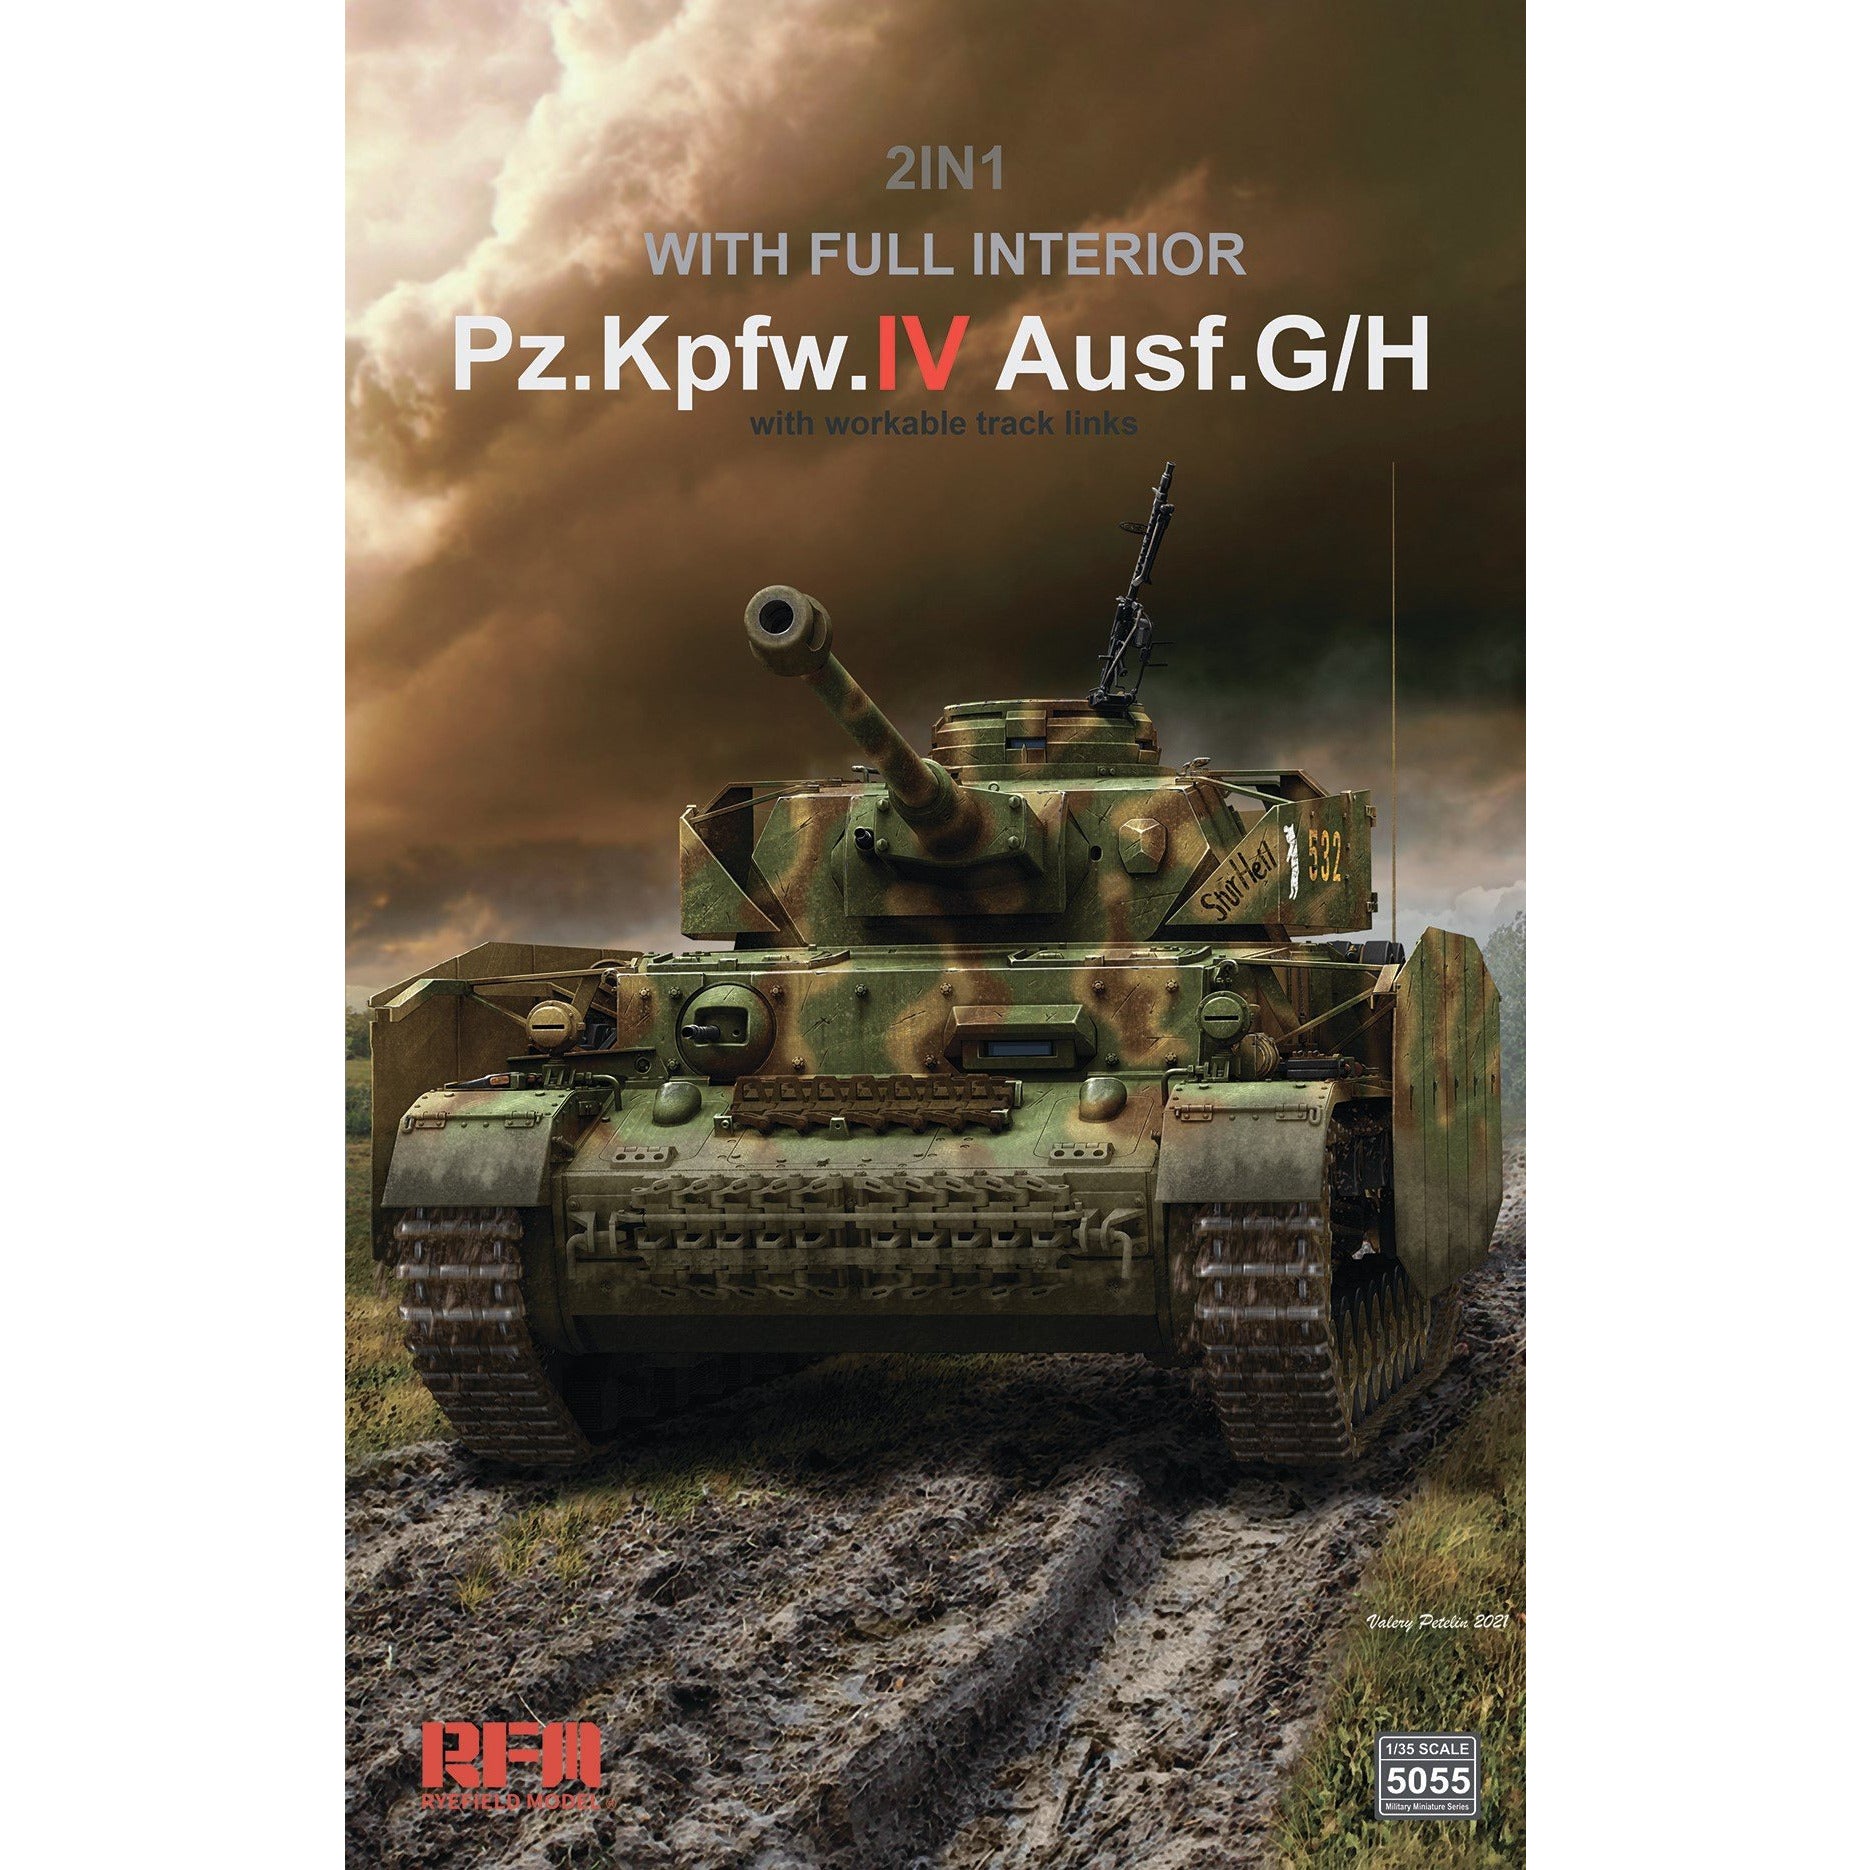 Pz.Kpfw.IV Ausf. G/H w/ Workable Track Links and Full Interior 1/35 by Ryefield Model